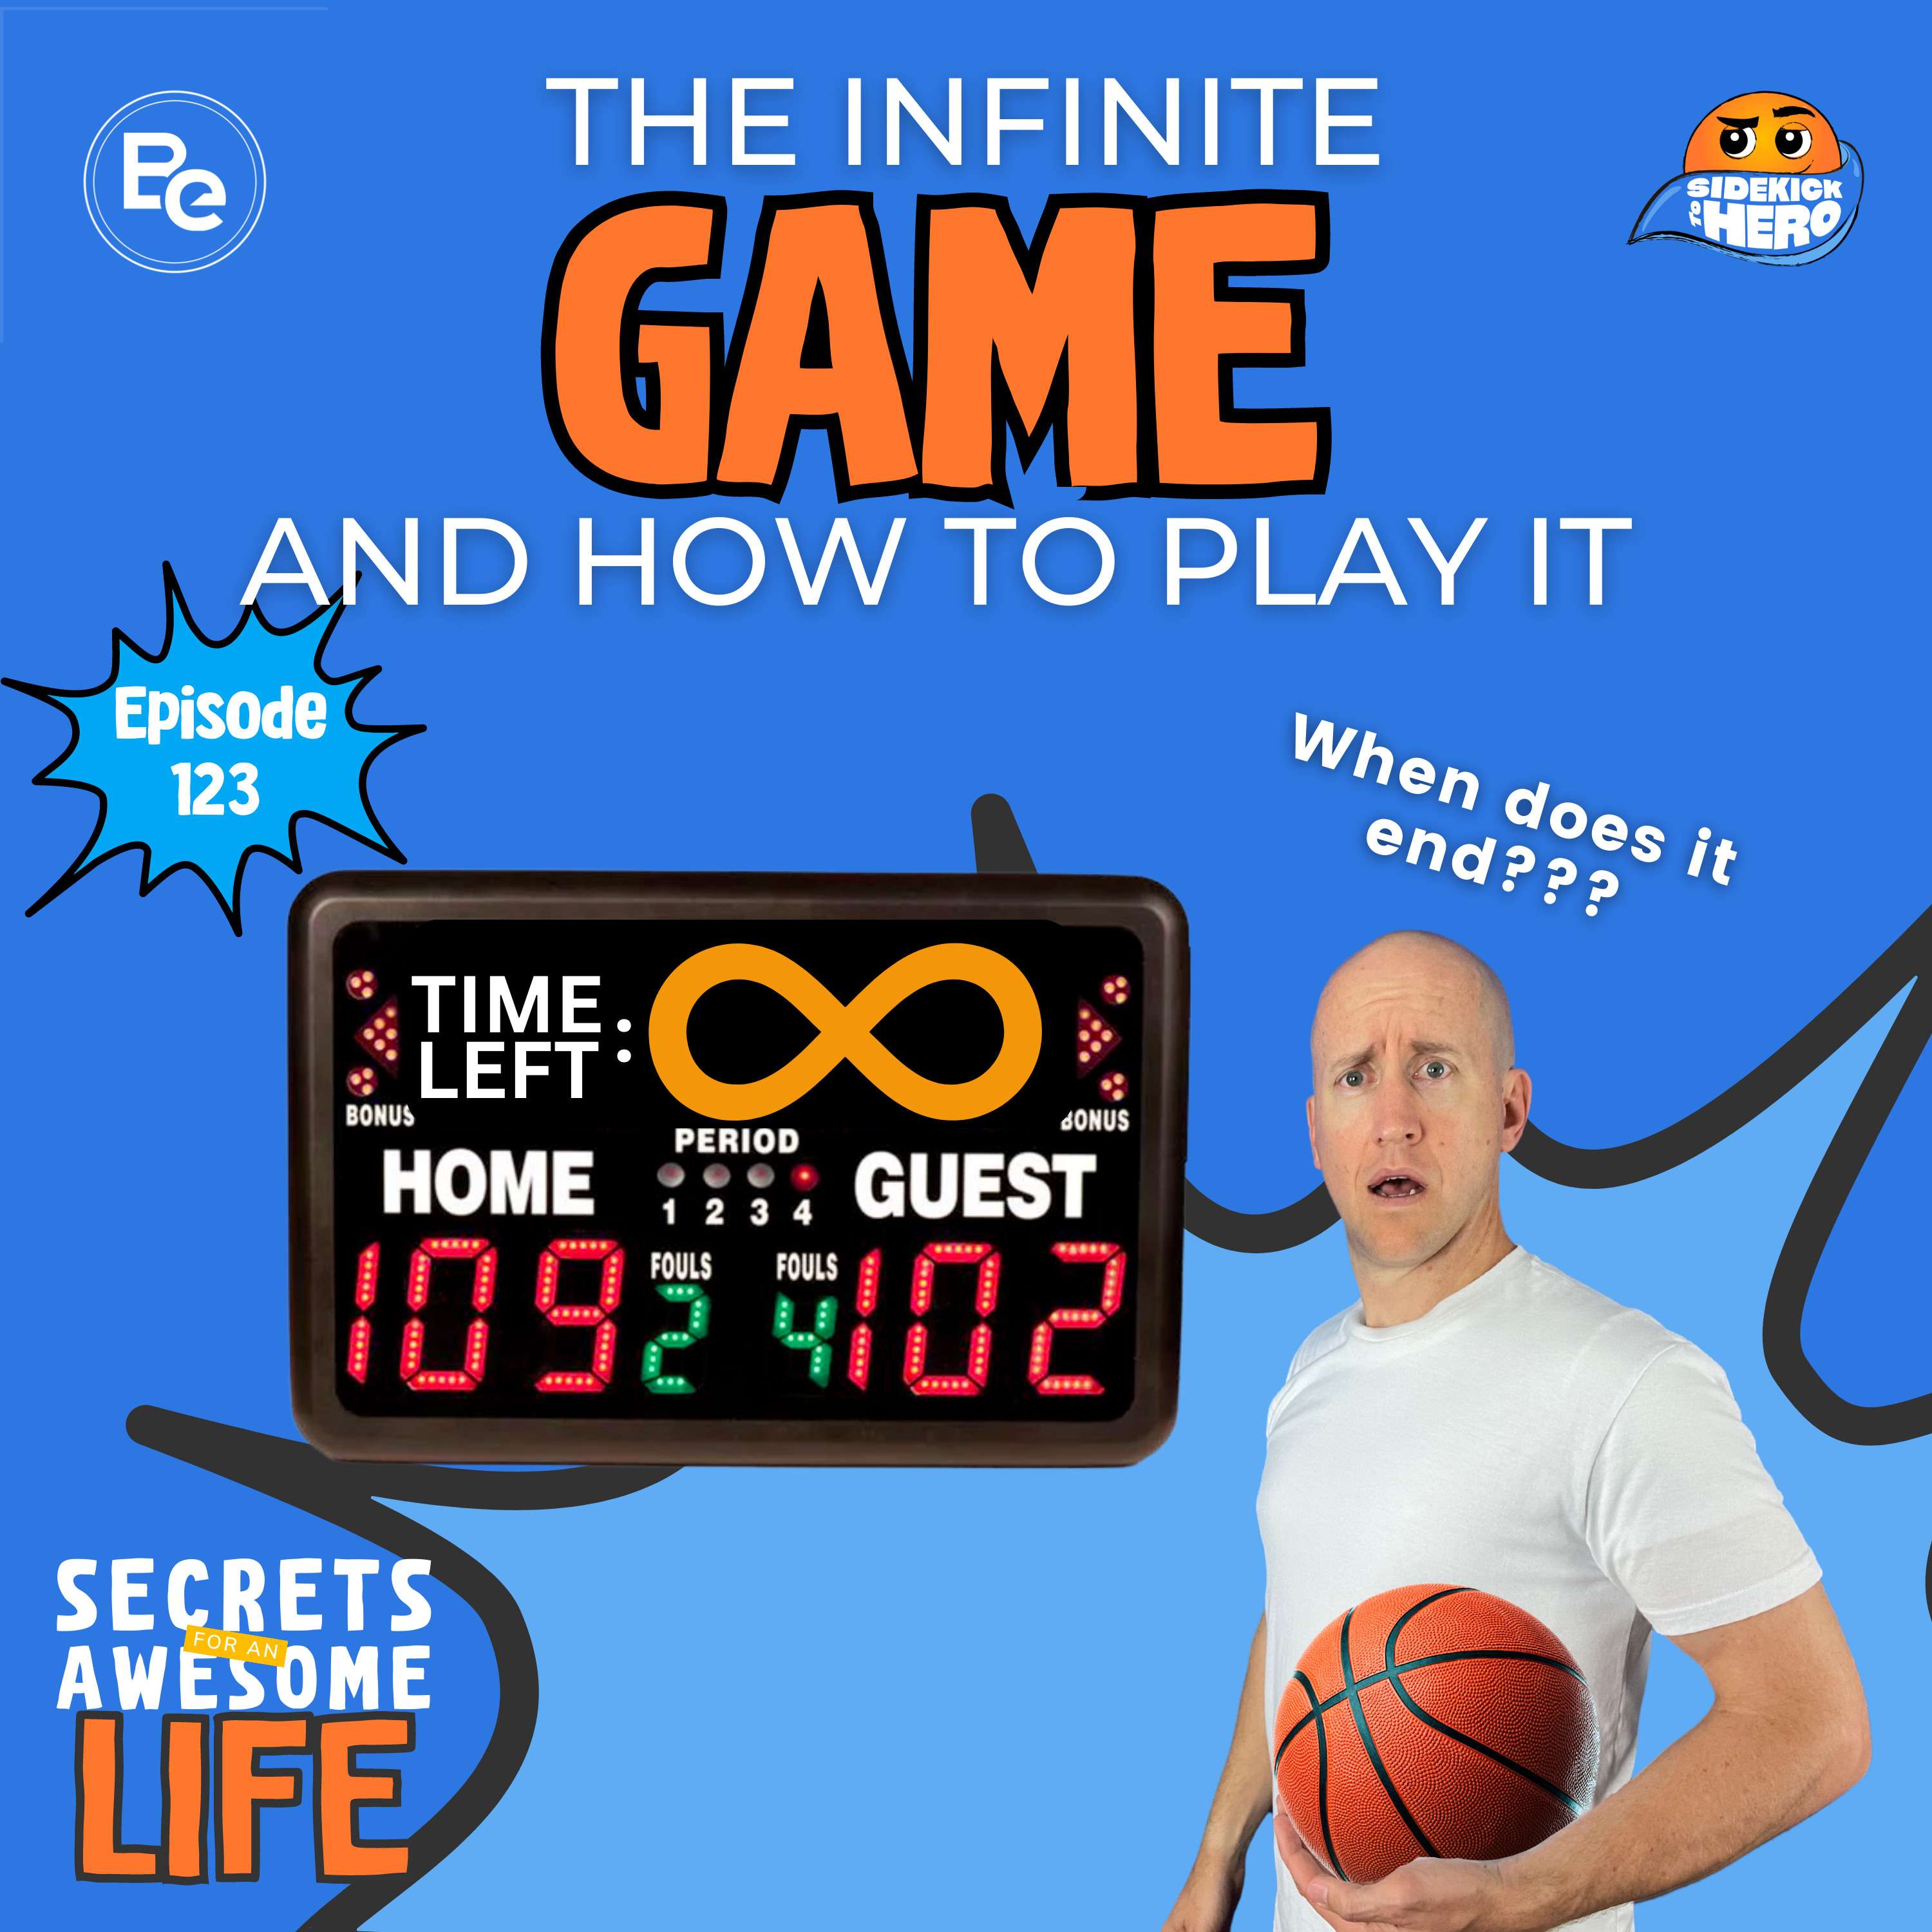 The Infinite Game and How to Play It